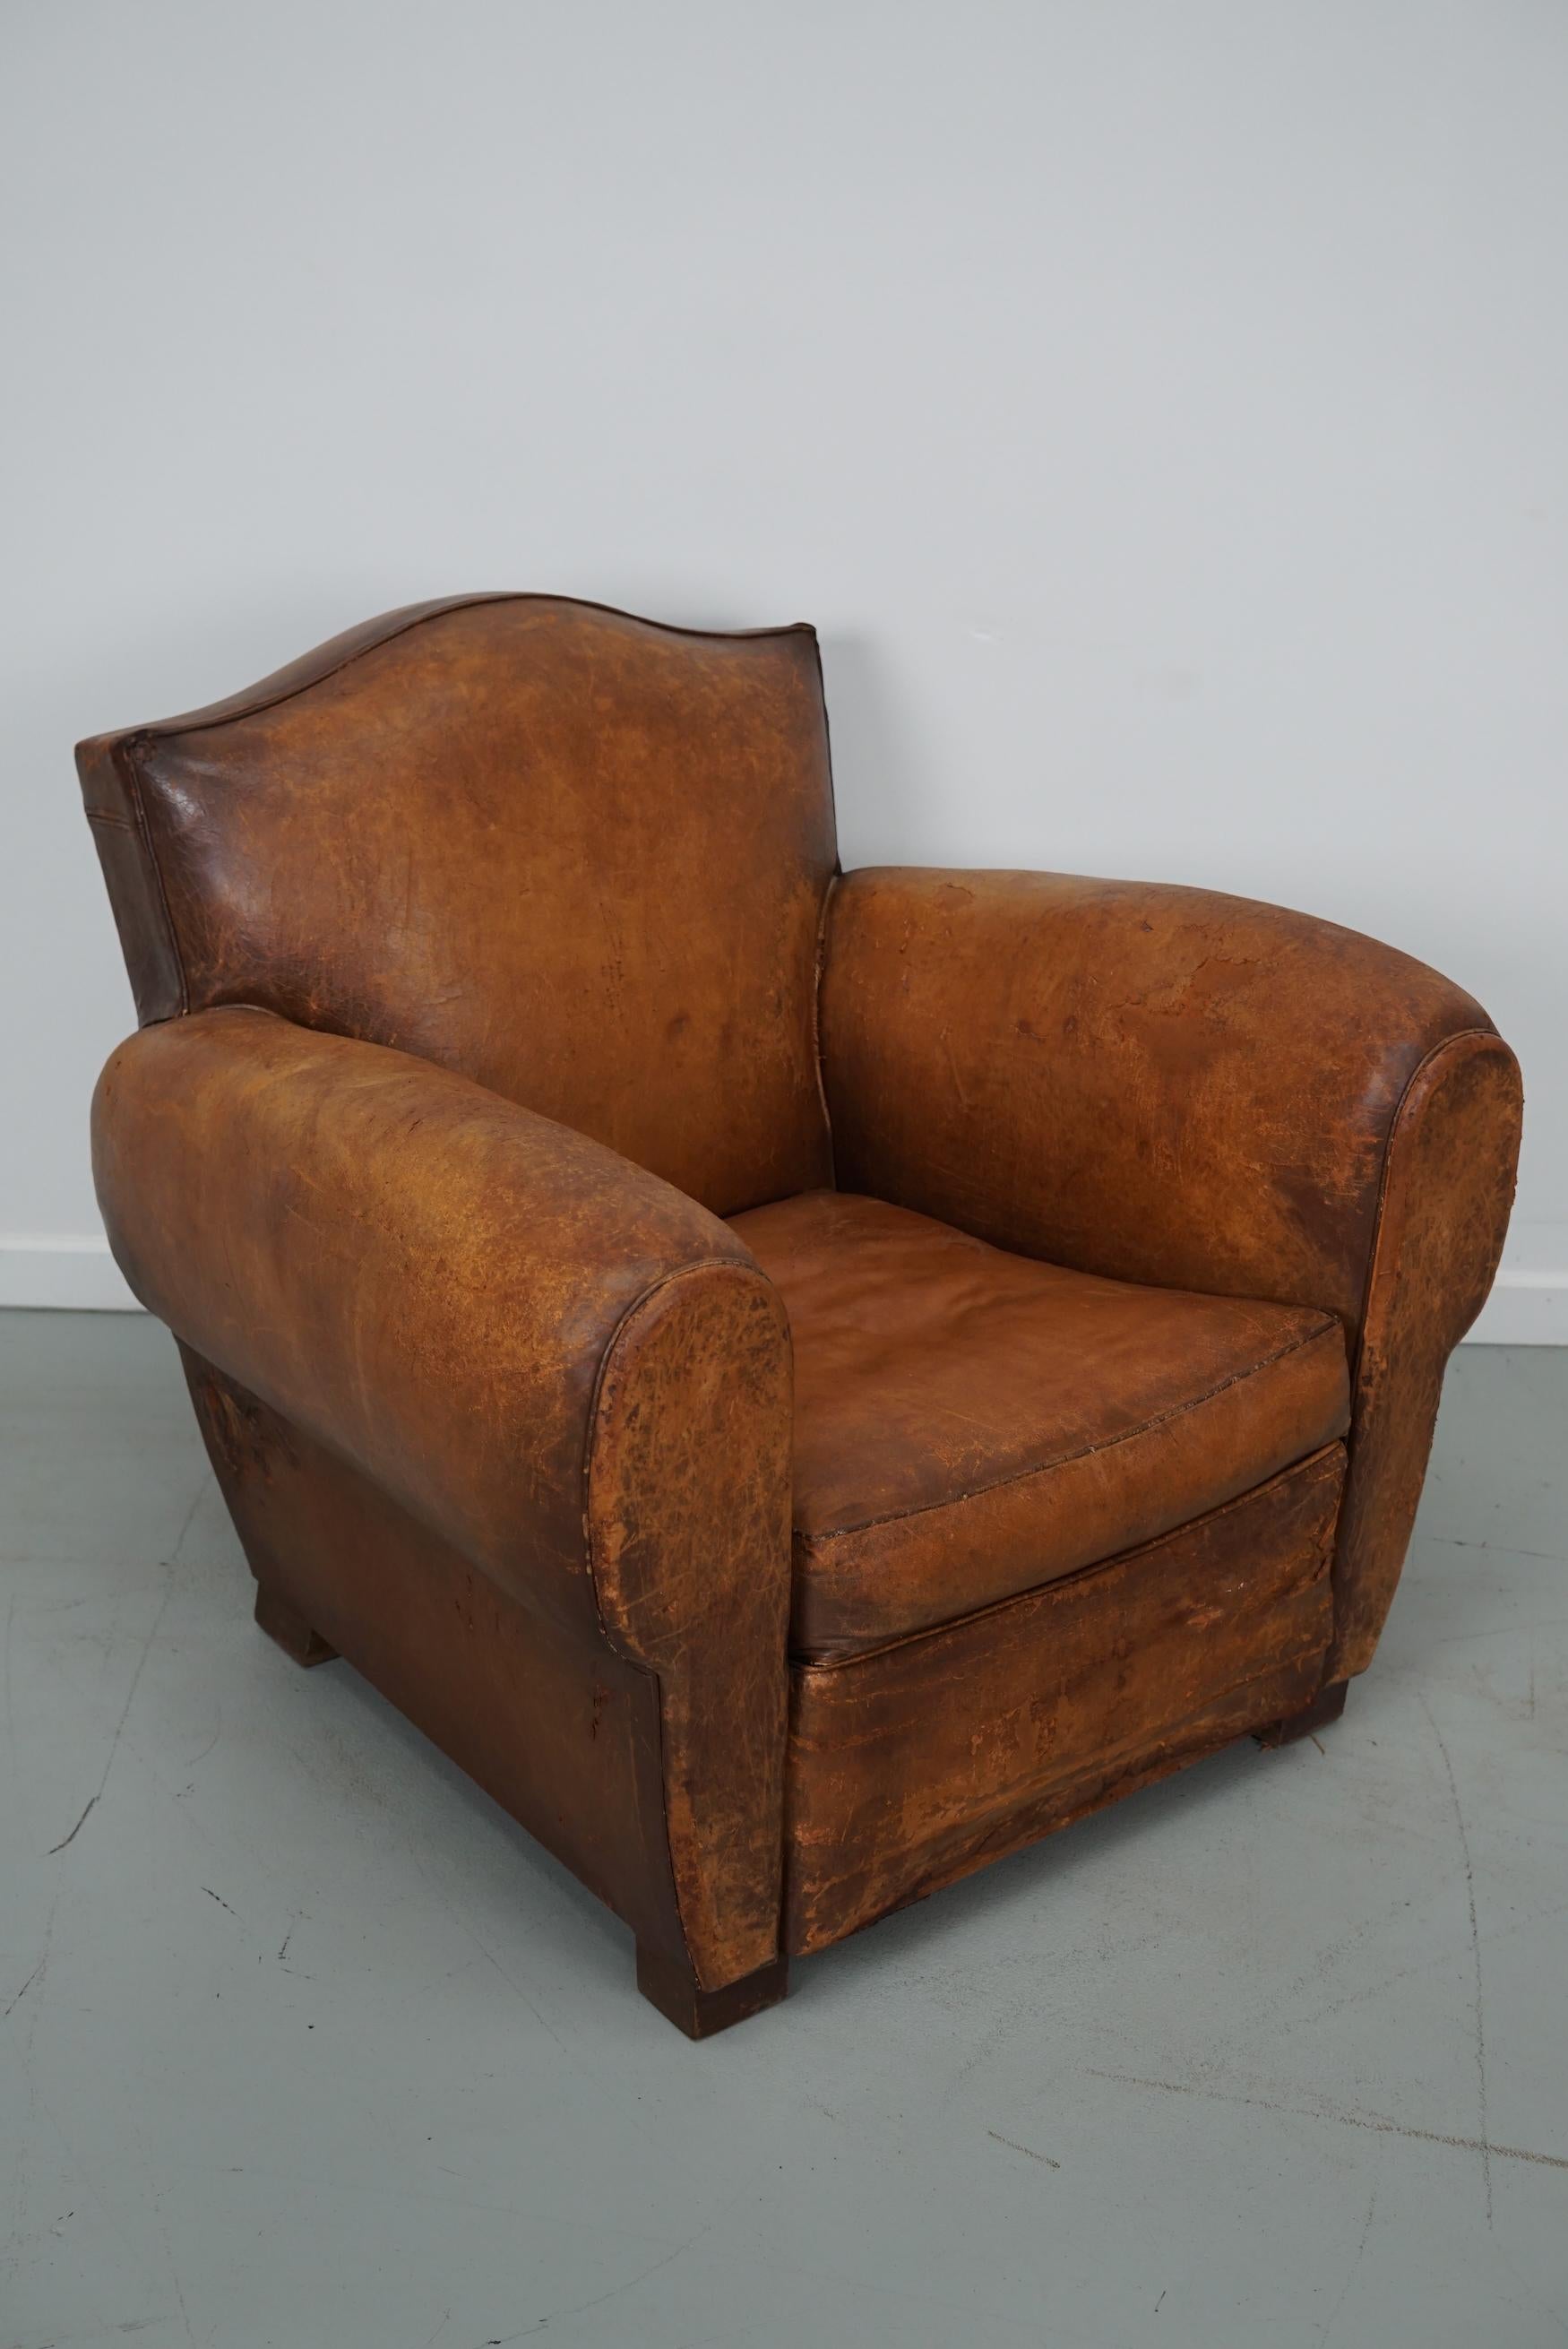 This cognac-colored leather club chair comes from France. It is upholstered with cognac-colored leather and features metal rivets and wooden legs. It is in a vintage worn condition with many signs of use, age and old repairs.